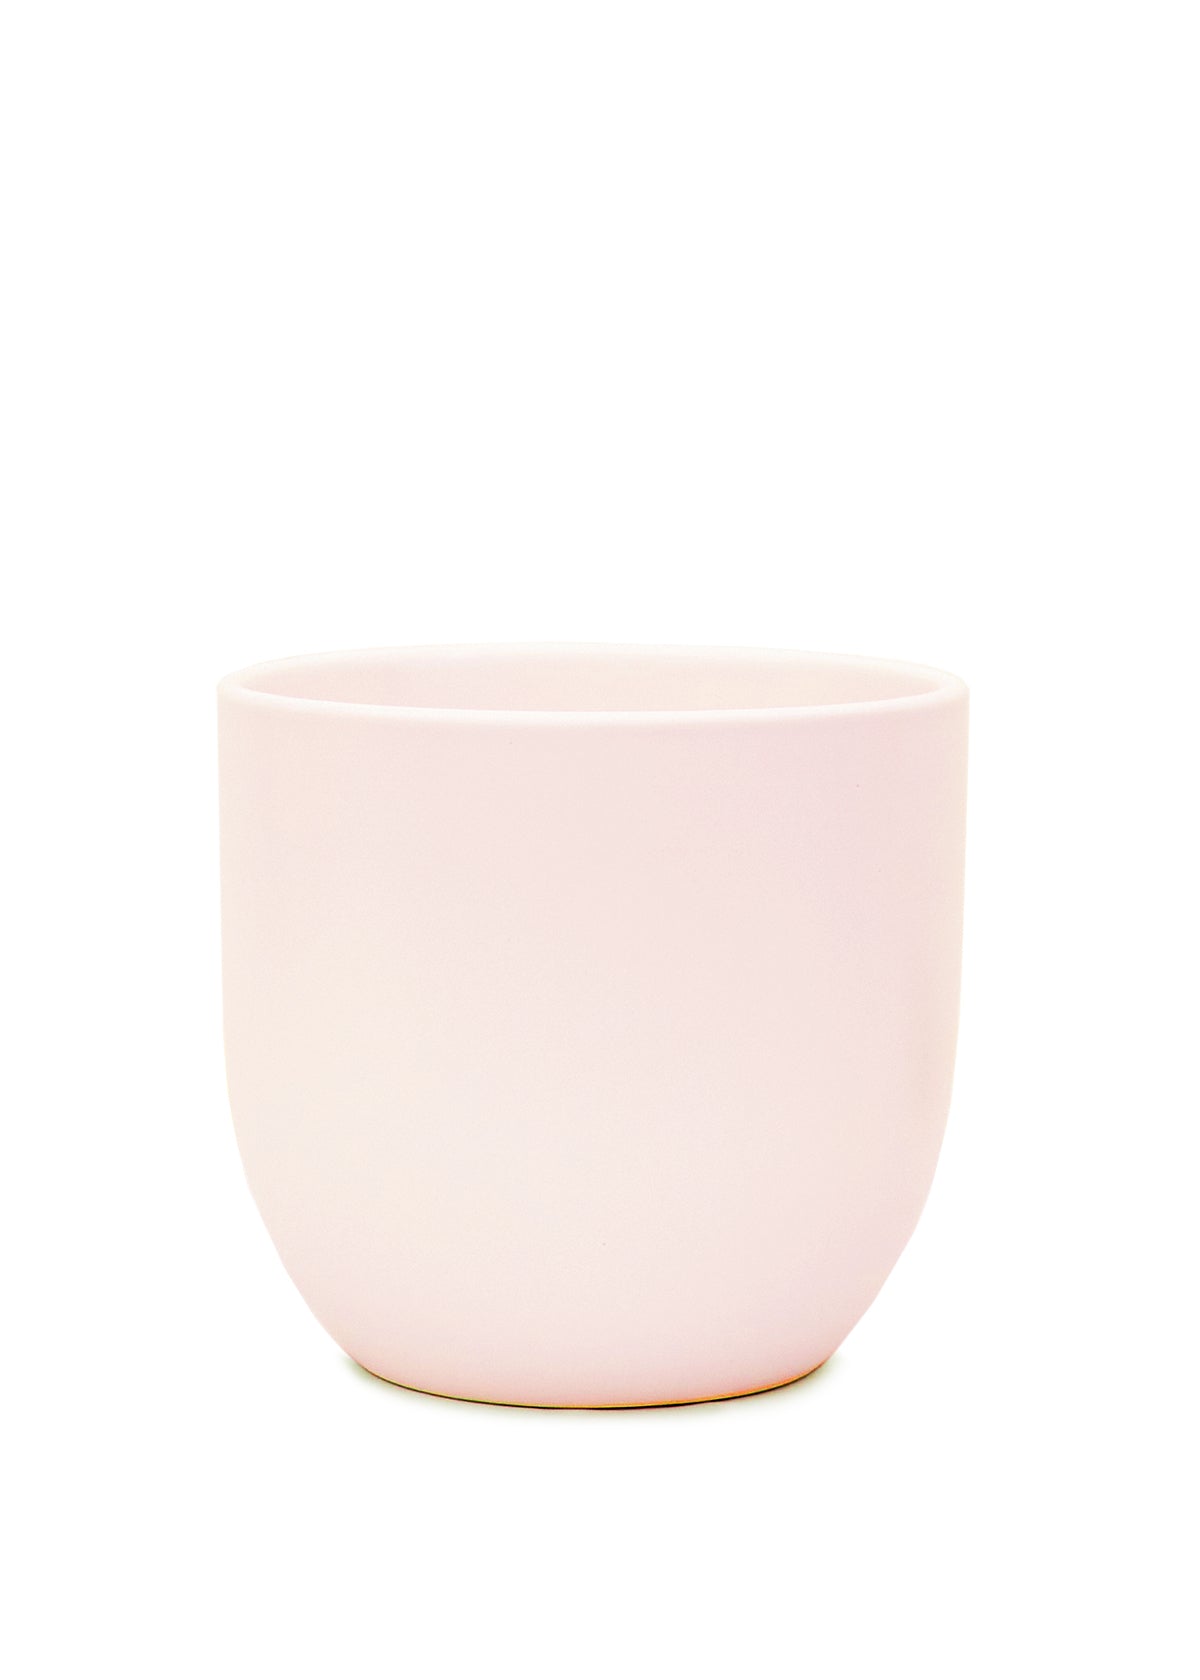 Rounded Ceramic Planter, Pink 7" Wide